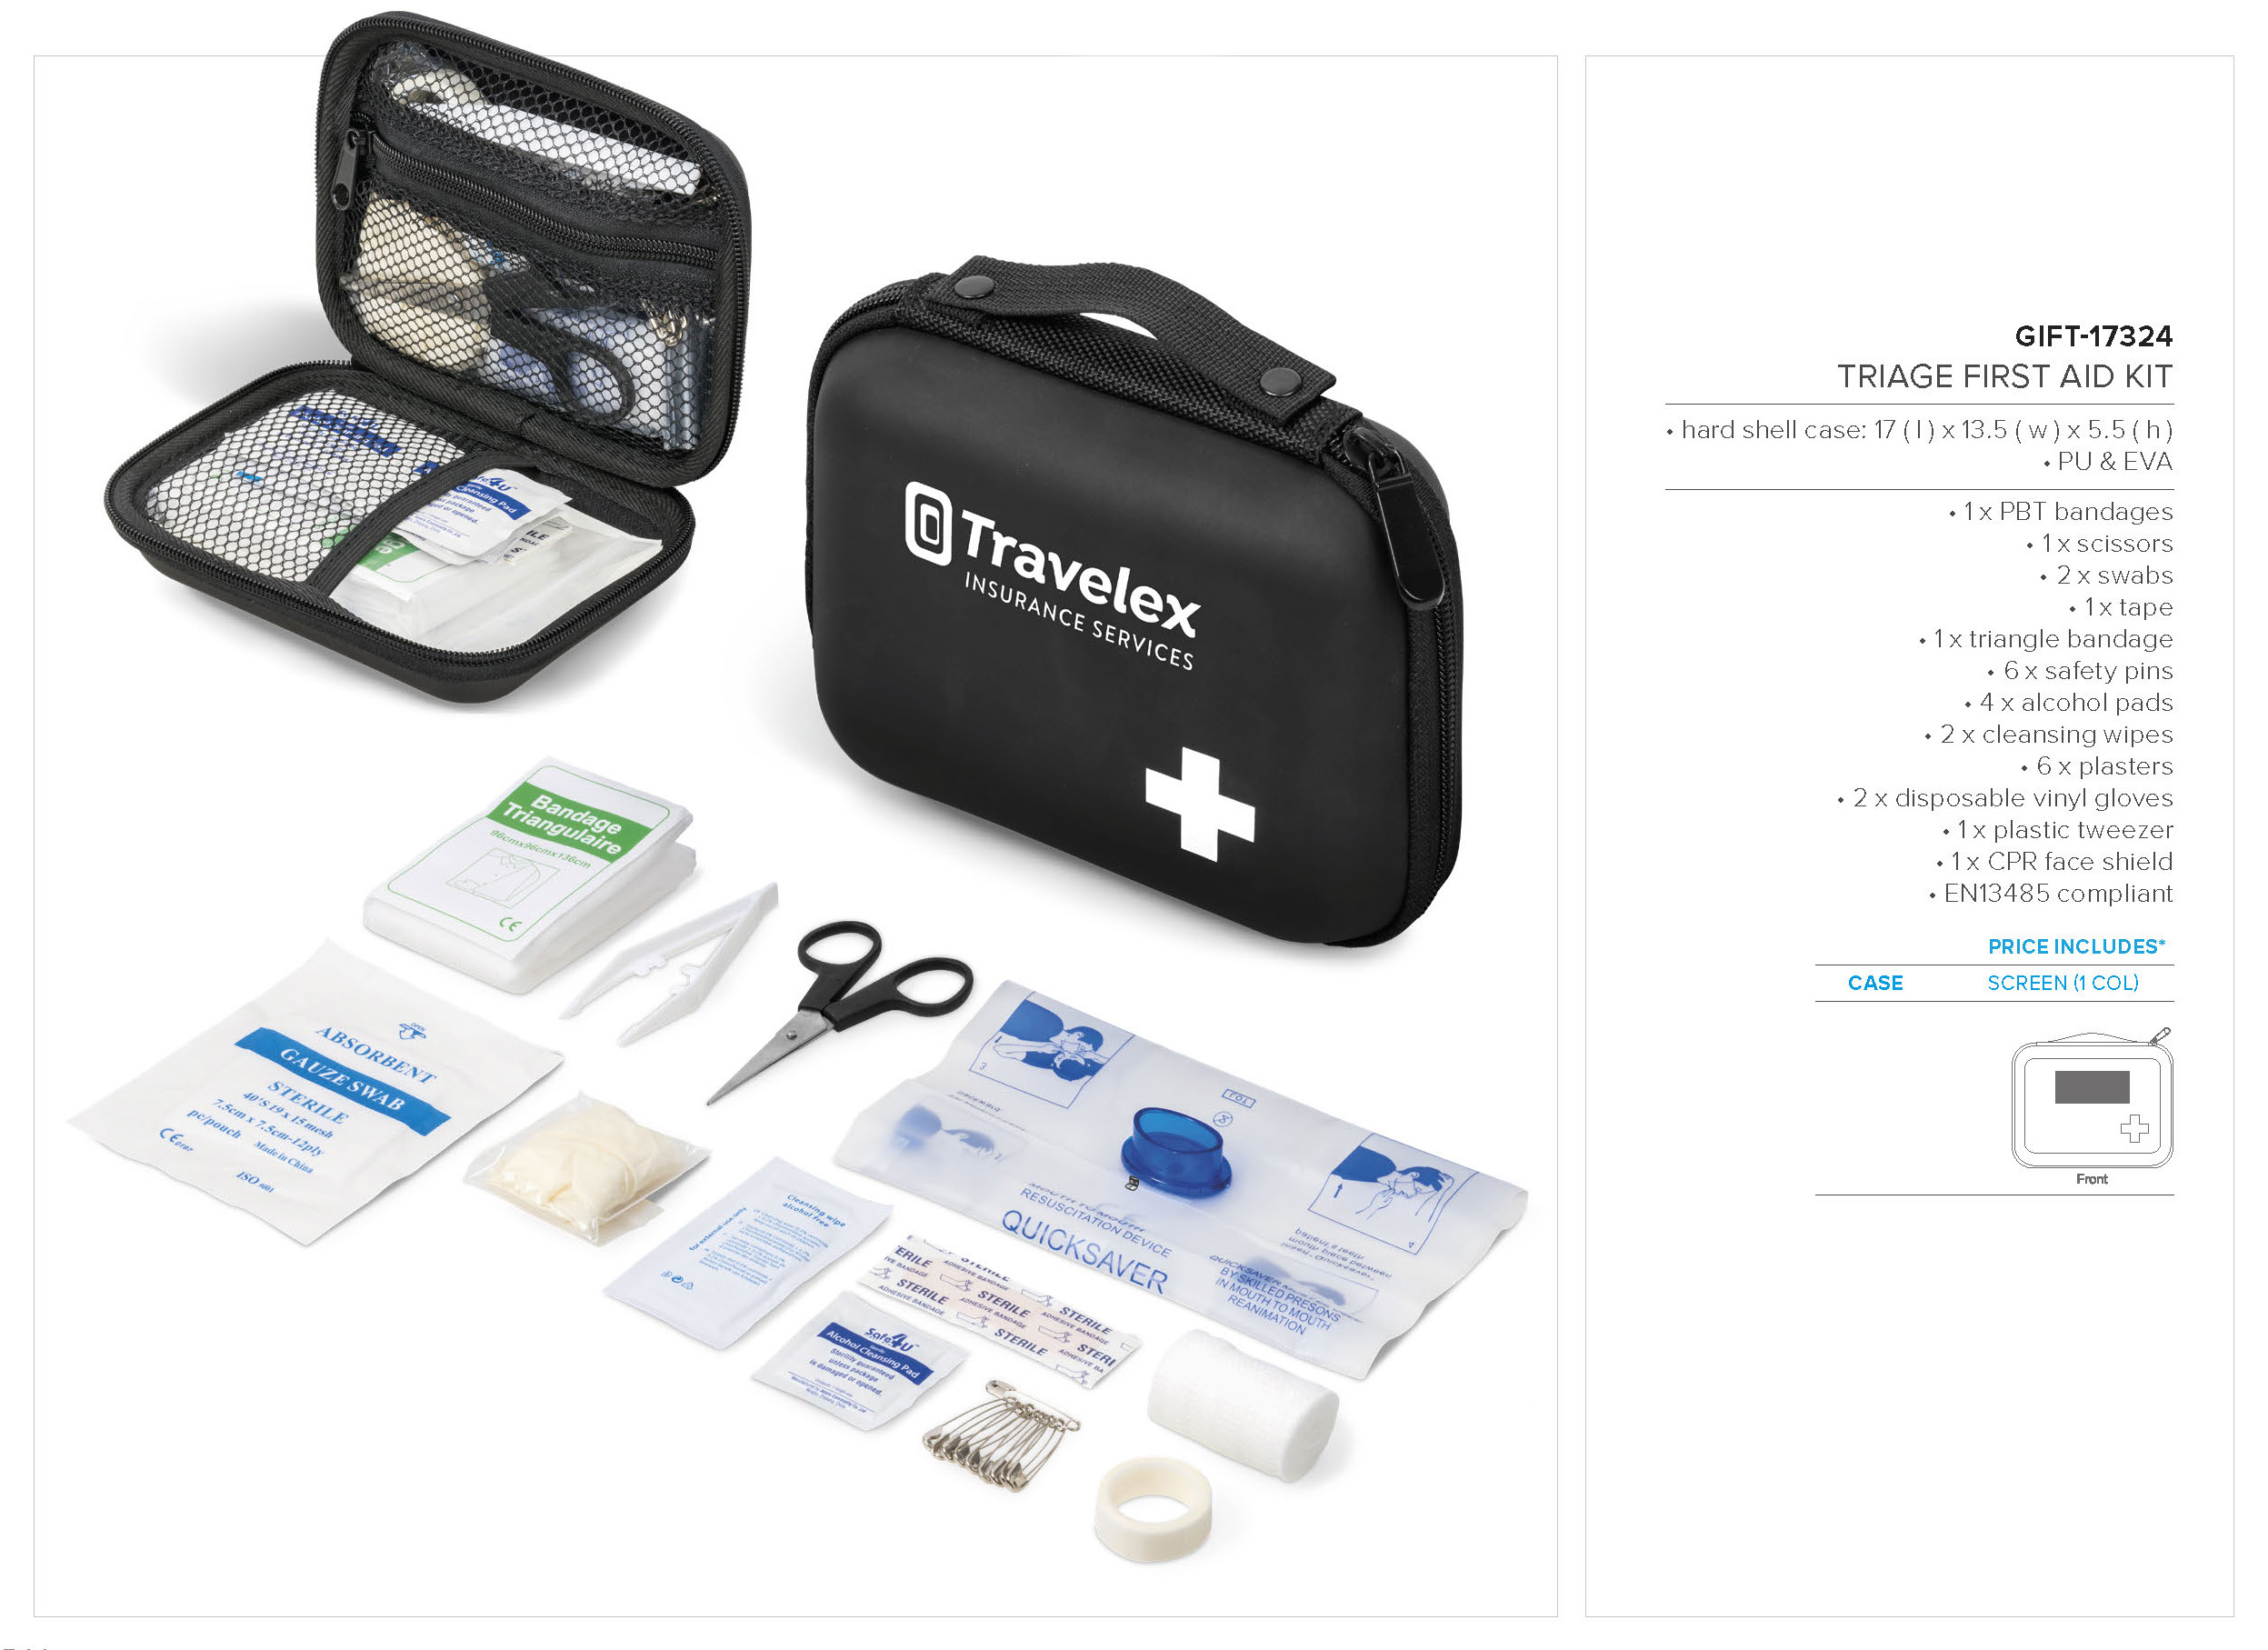 GIFT-17324 - Triage First Aid Kit - Catalogue Image